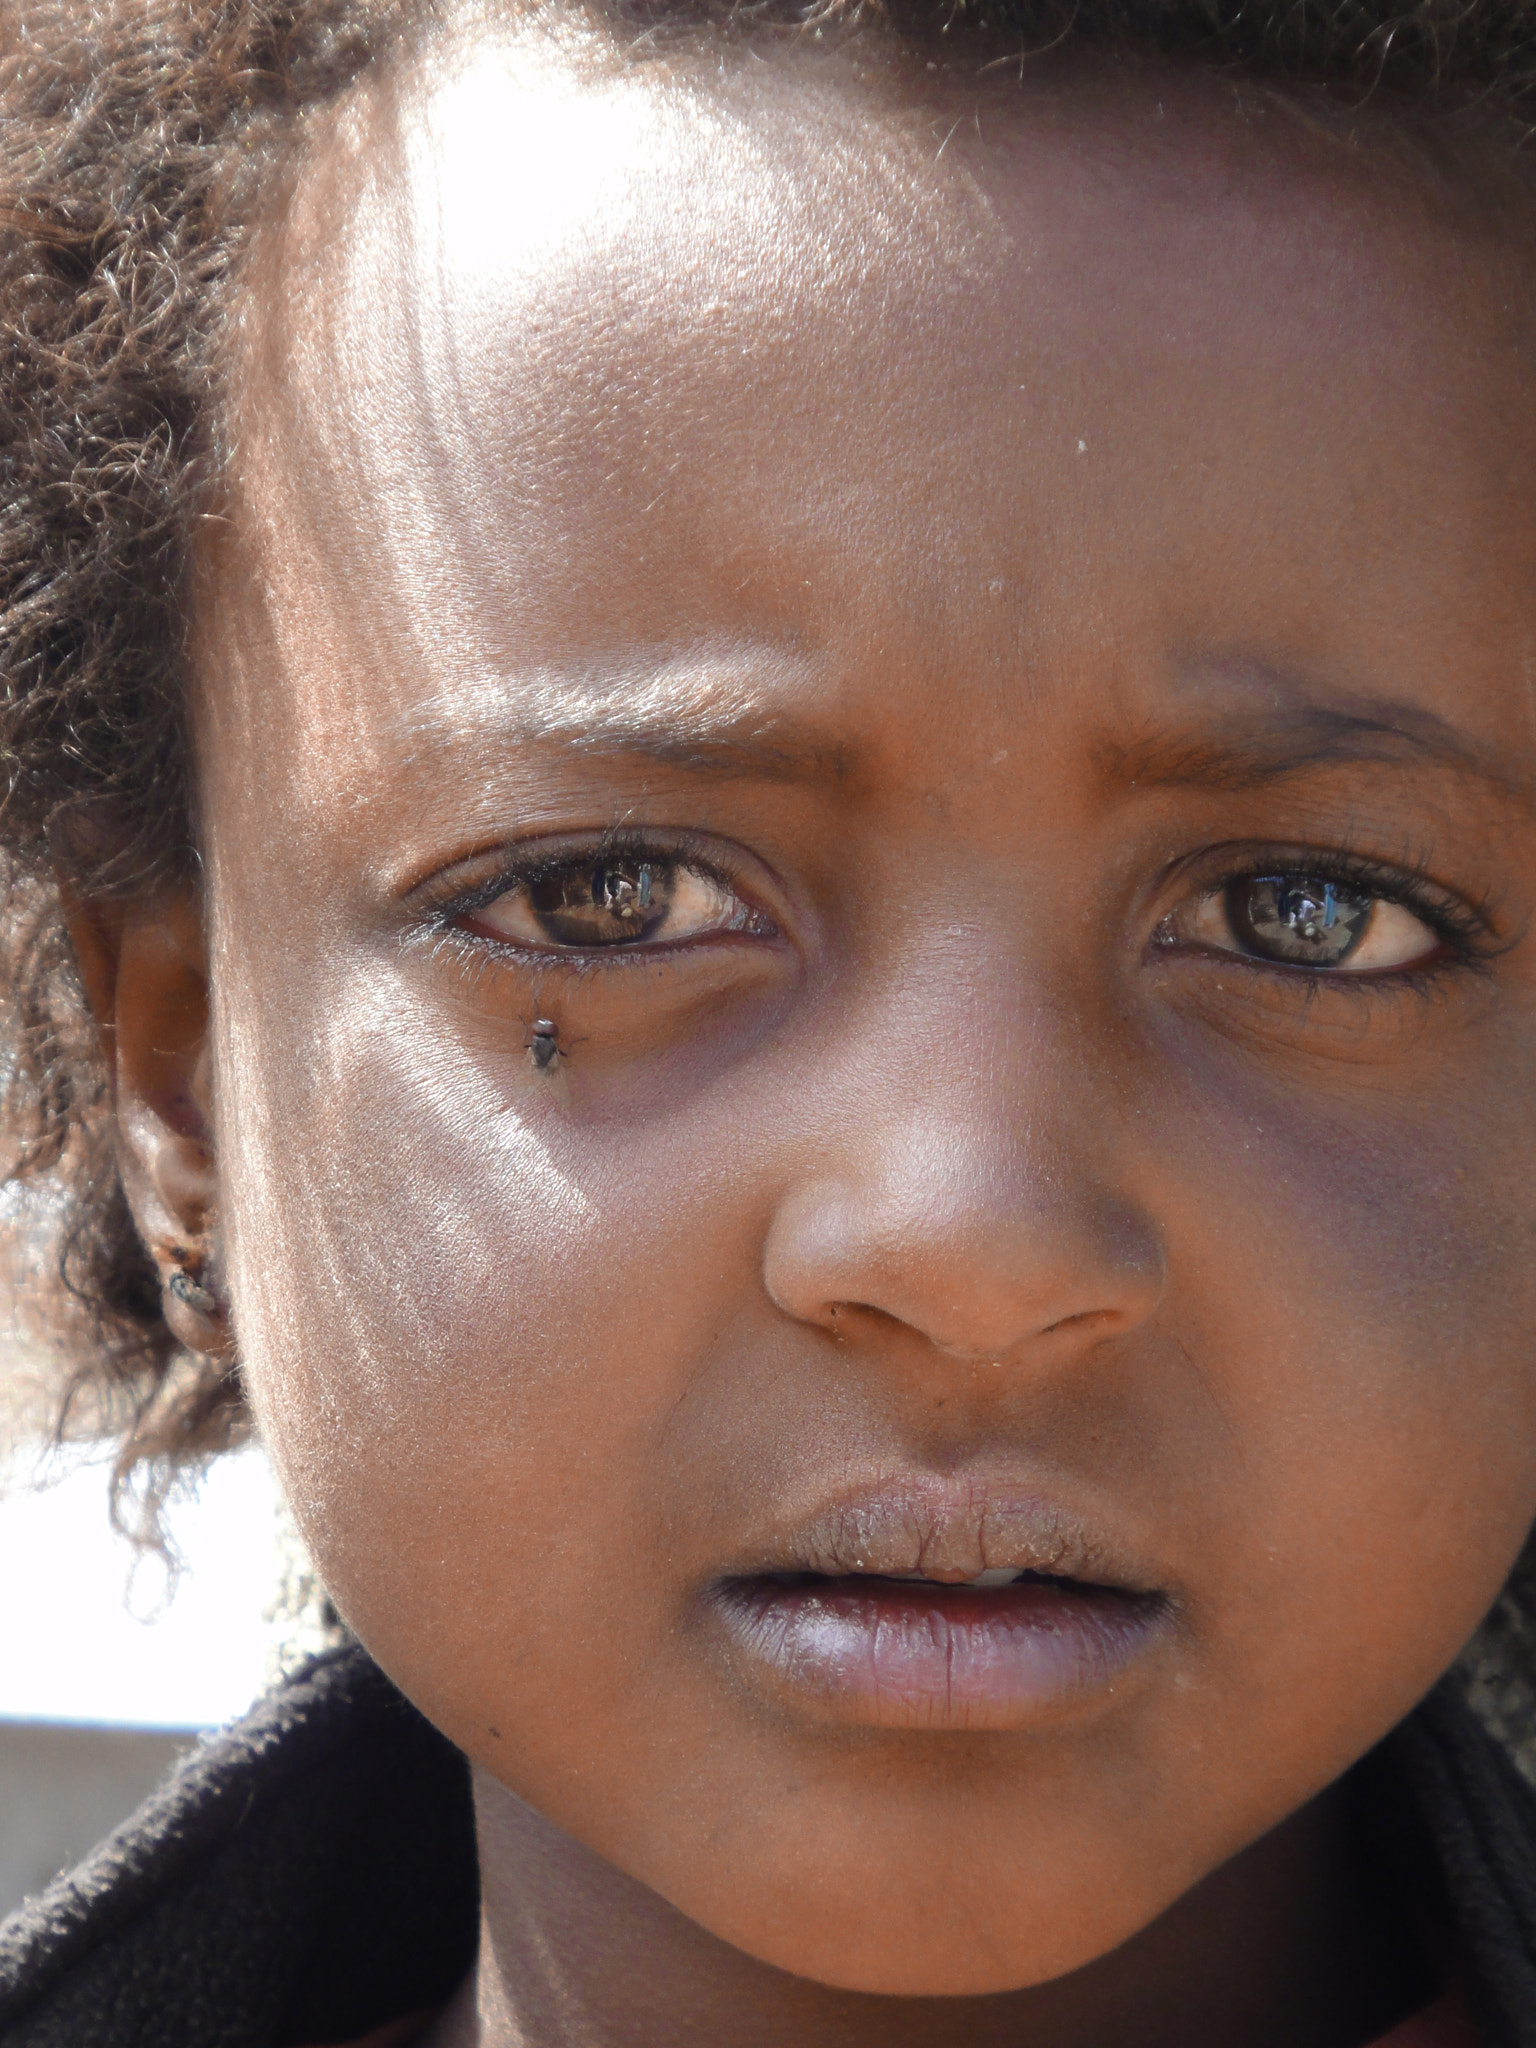 Sony DSC-TX7 sample photo. Ethiopia, dessie, village girl, little girl, poverty, soulful eyes, fly, pensive face, yearning,... photography